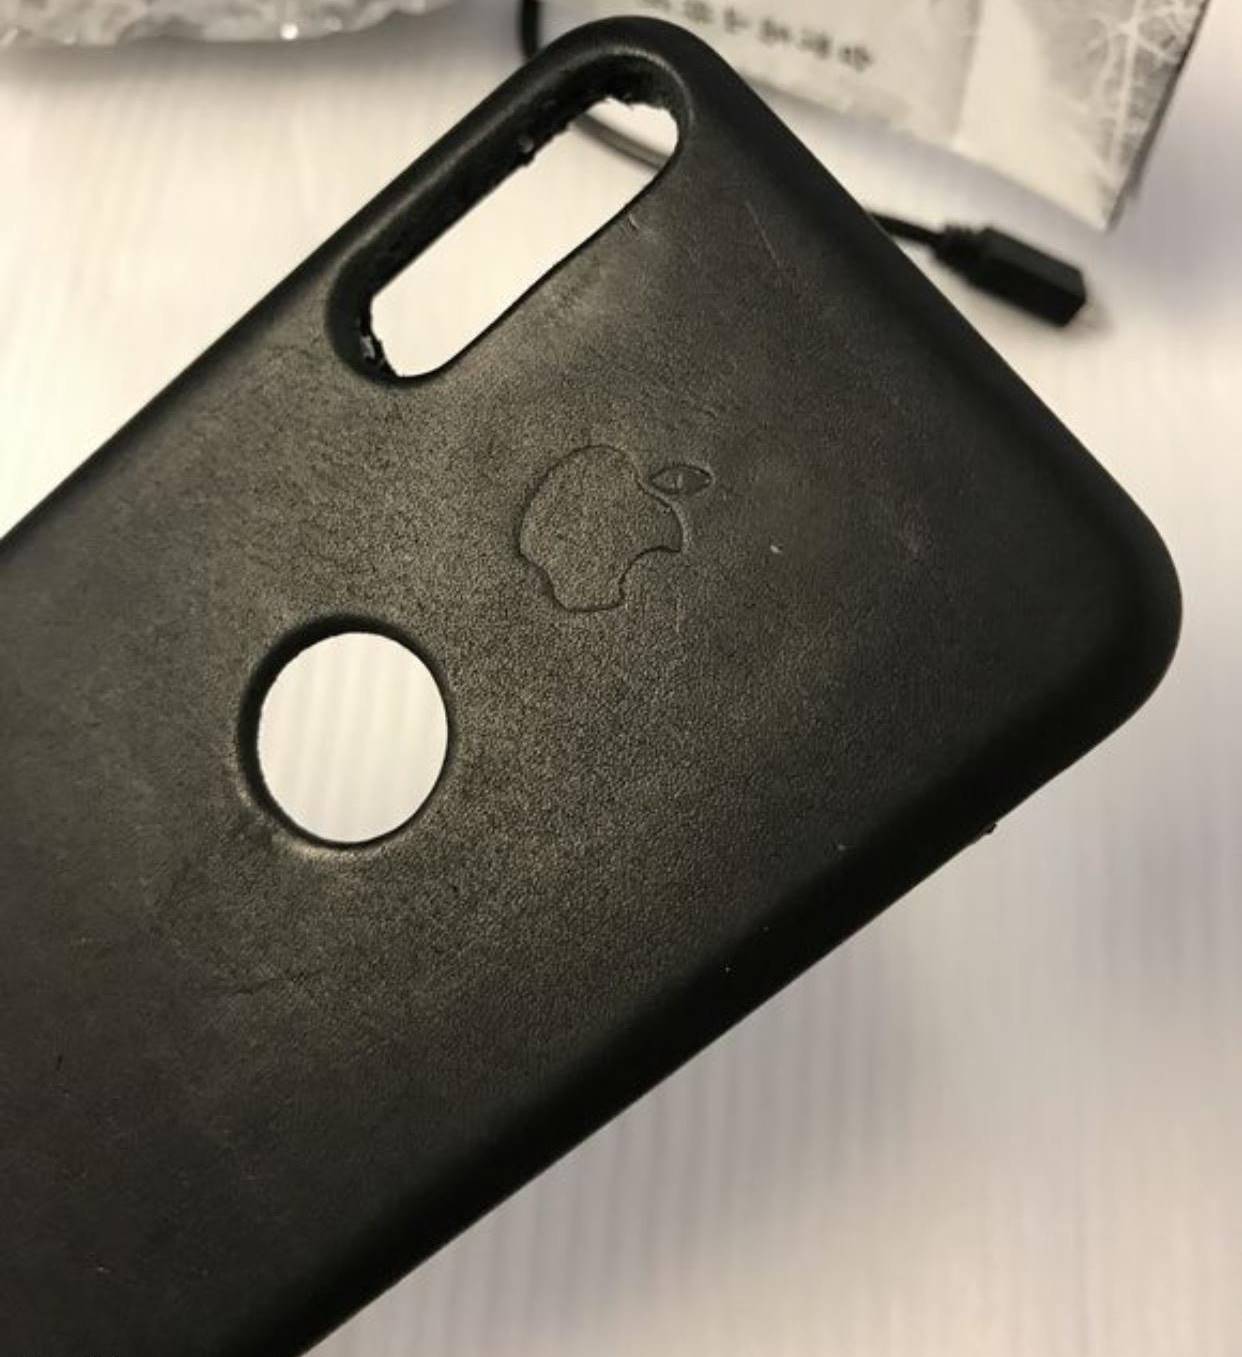 iPhone 8 Case Apple Confirms Touch ID